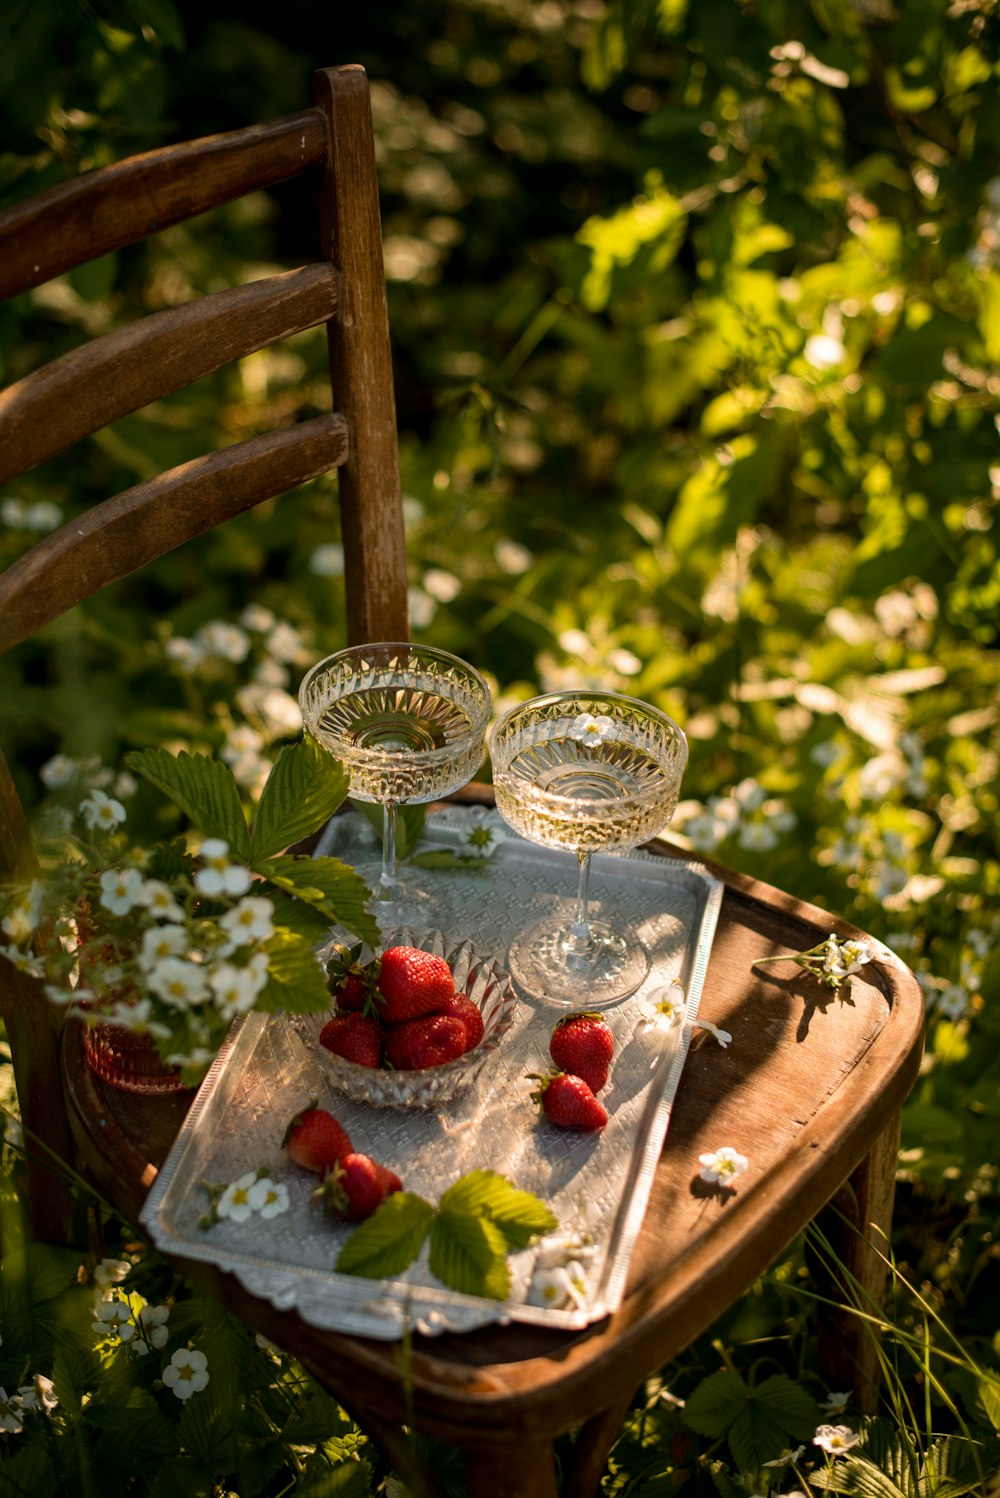 clear glass bowl with red and white berries on brown wooden table